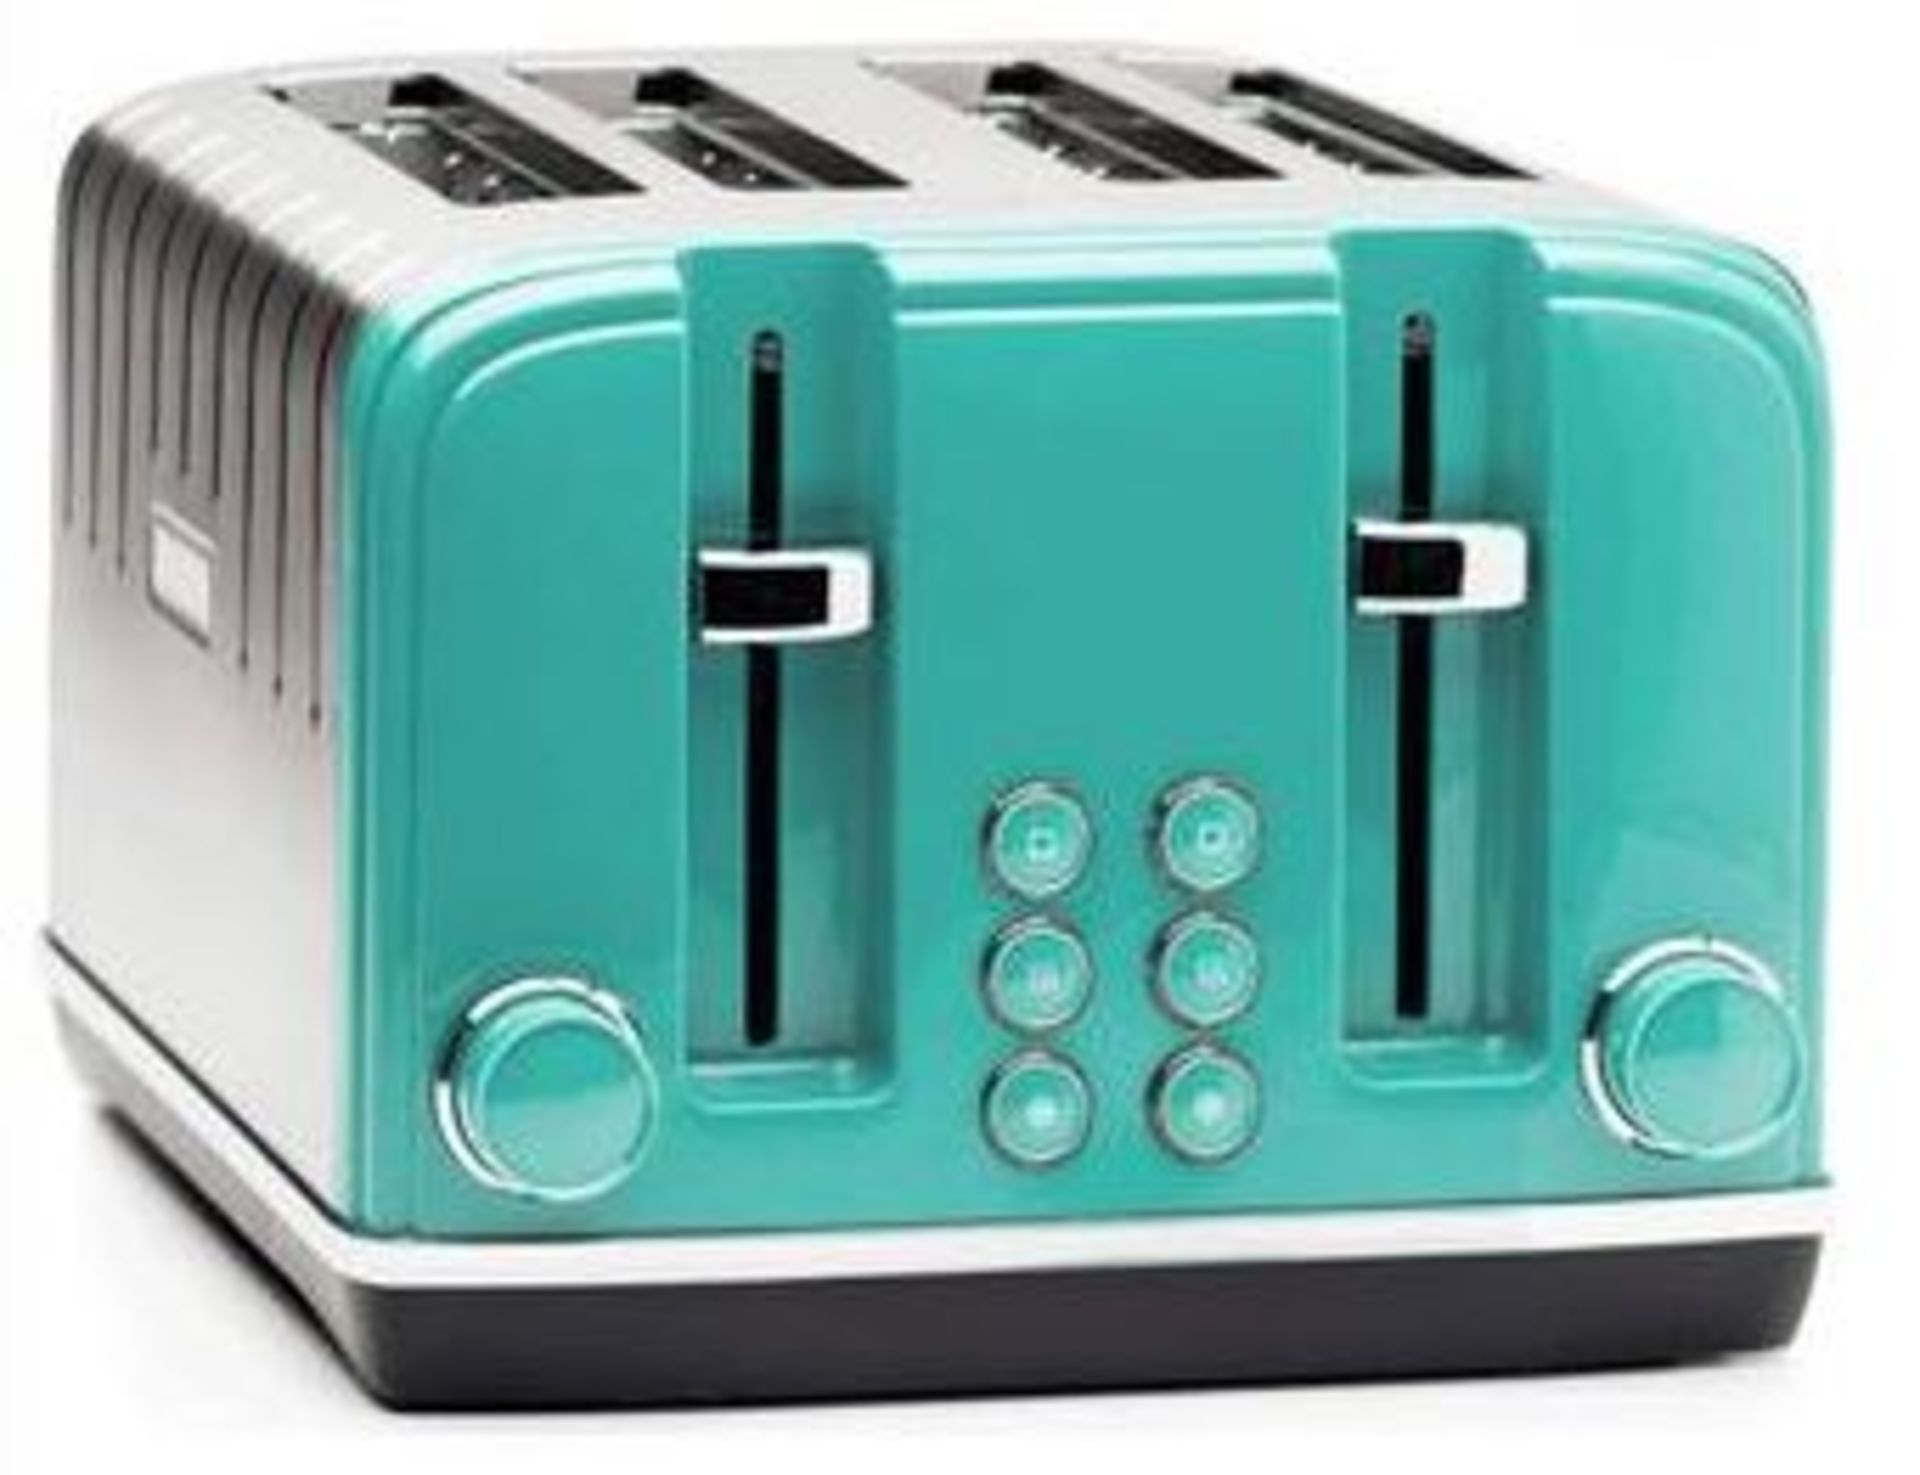 Haden Salcombe 4 Slice Toaster. (RRP £65.99) Appears As New Ð Opened To Check Contents. No ...